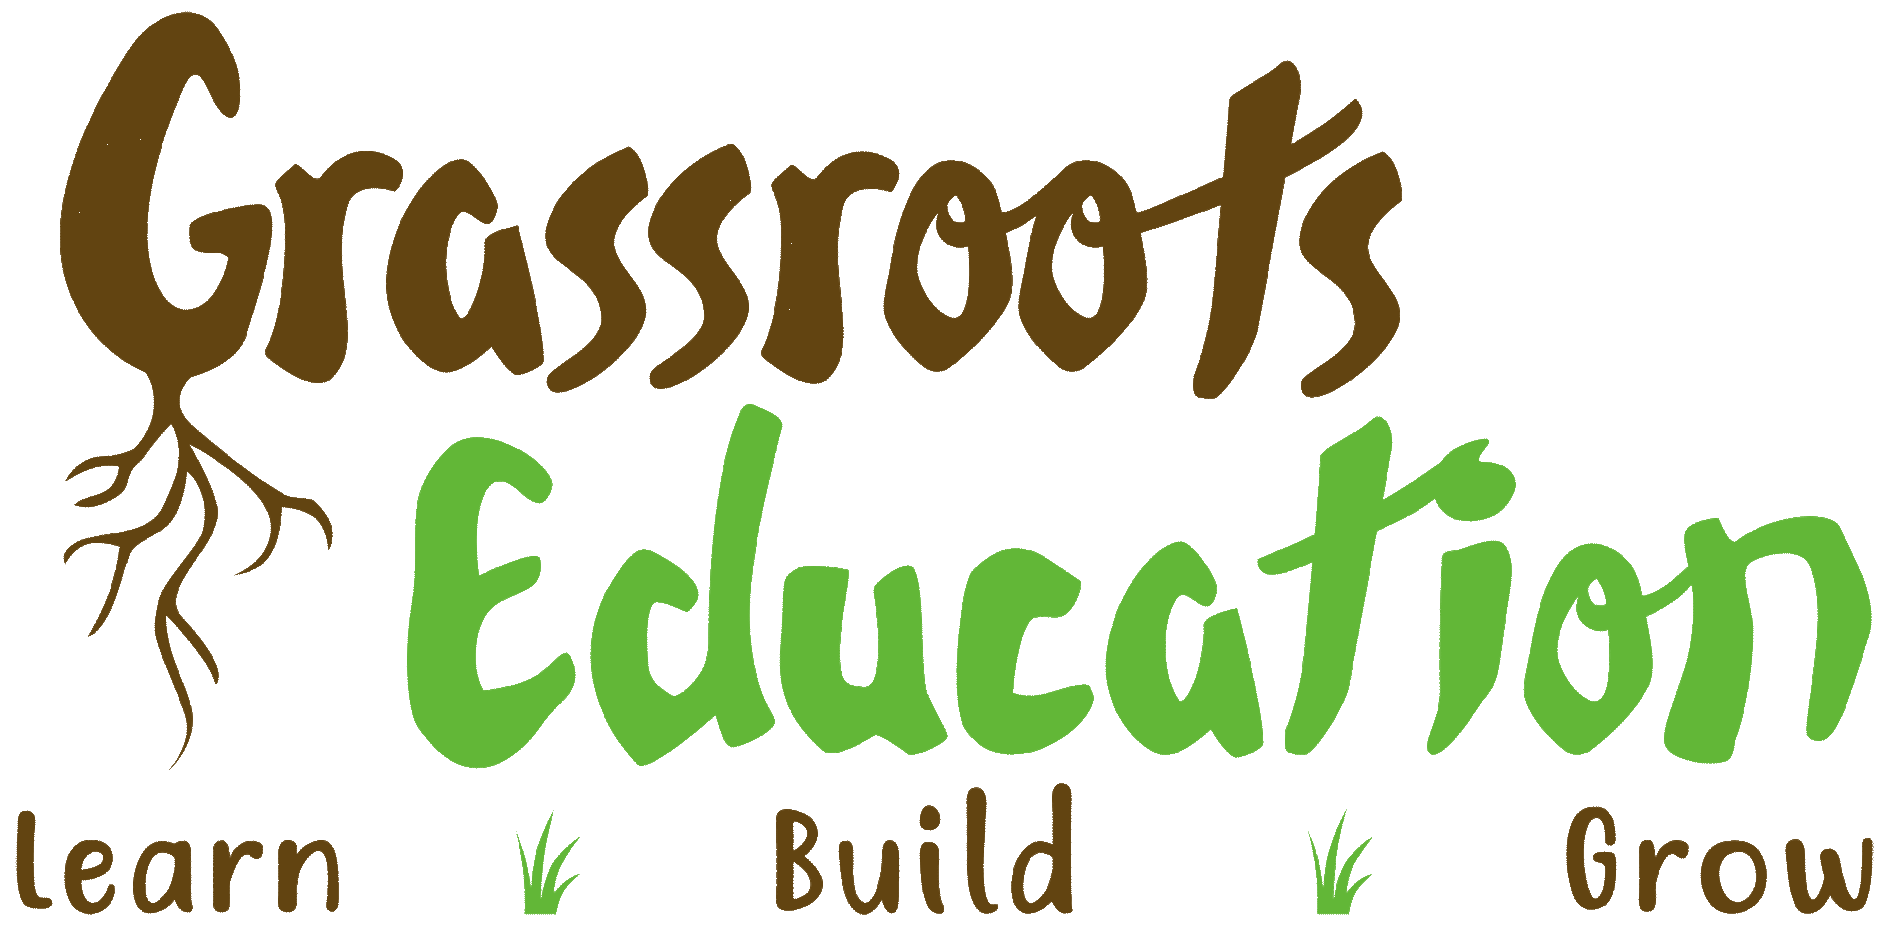 The Grassroots Education